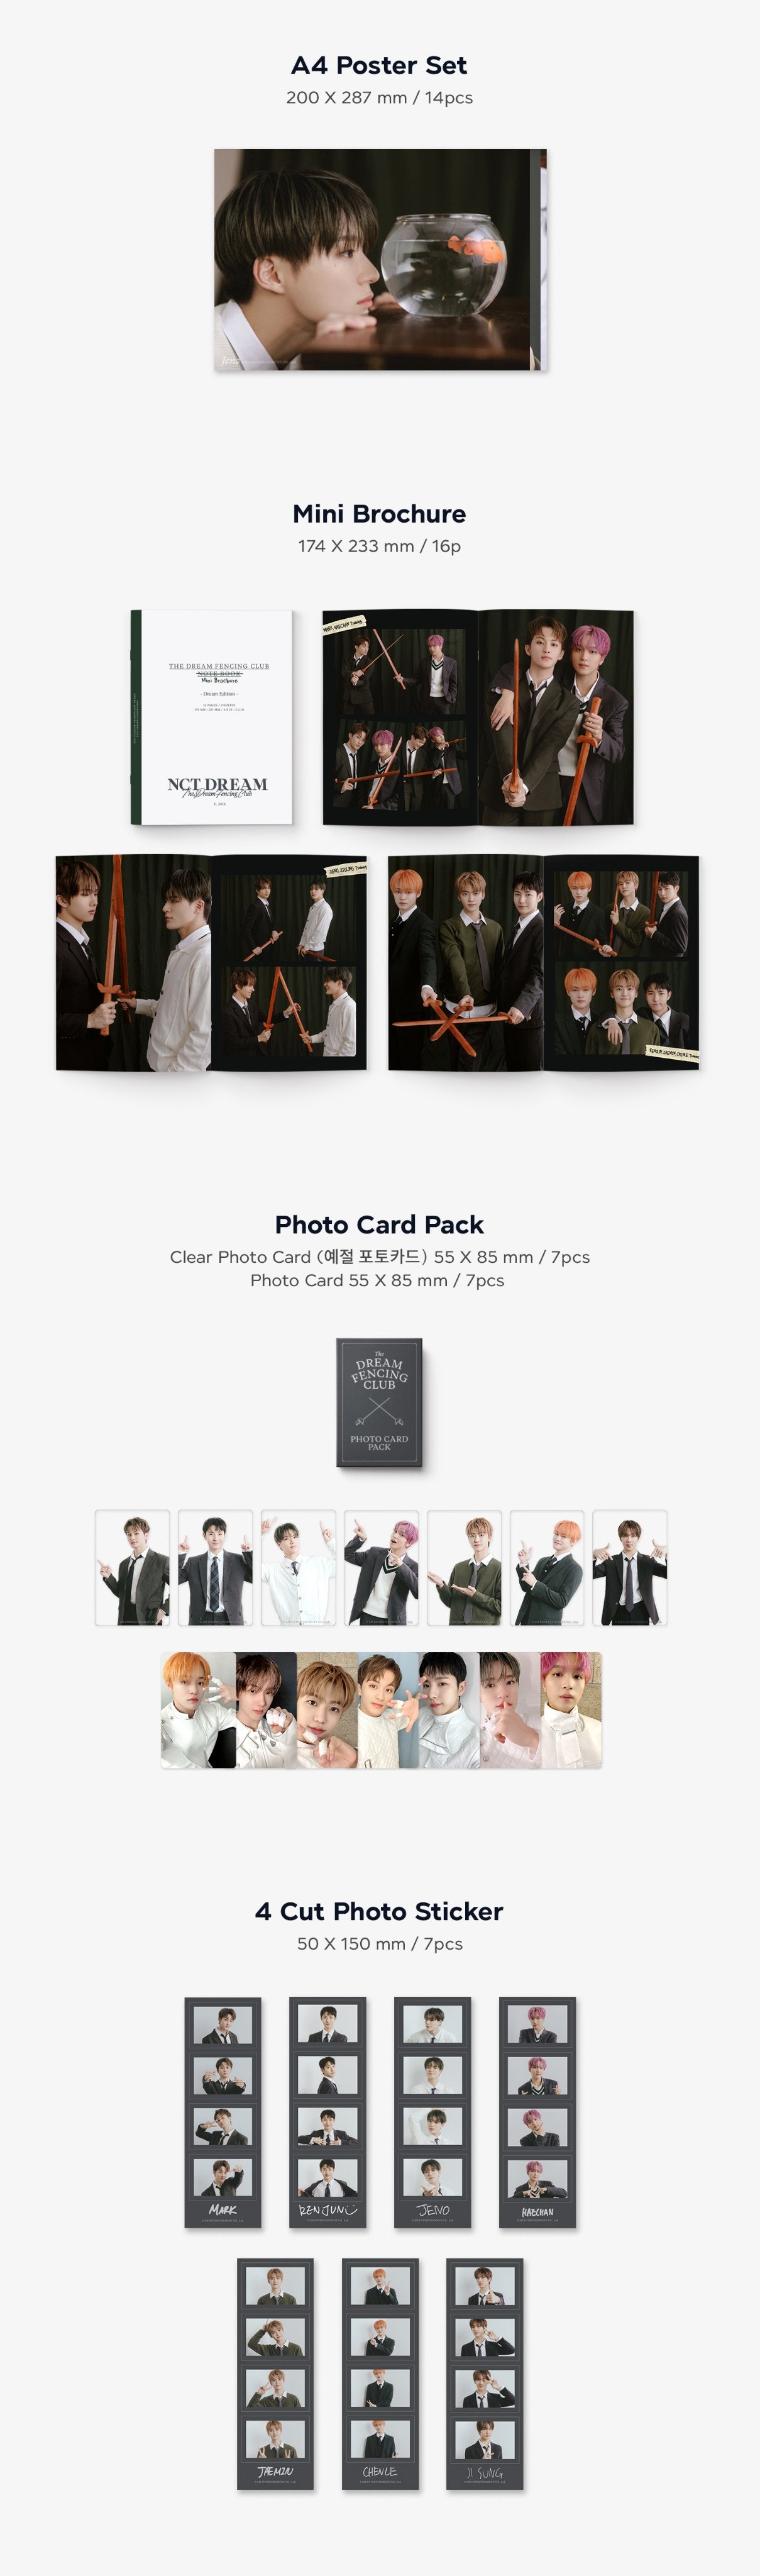 UK Free Tracked Shipping for NCT DREAM 2023 Season's Greetings with pre-order benefit POB photocards available. Buy from a huge collection of official merch at the best online kpop store marketplace in Manchester UK Europe. Our shop stocks K-pop LOONA BTS TXT. We have Kuromi Sanrio photocard holder keyrings for sale.